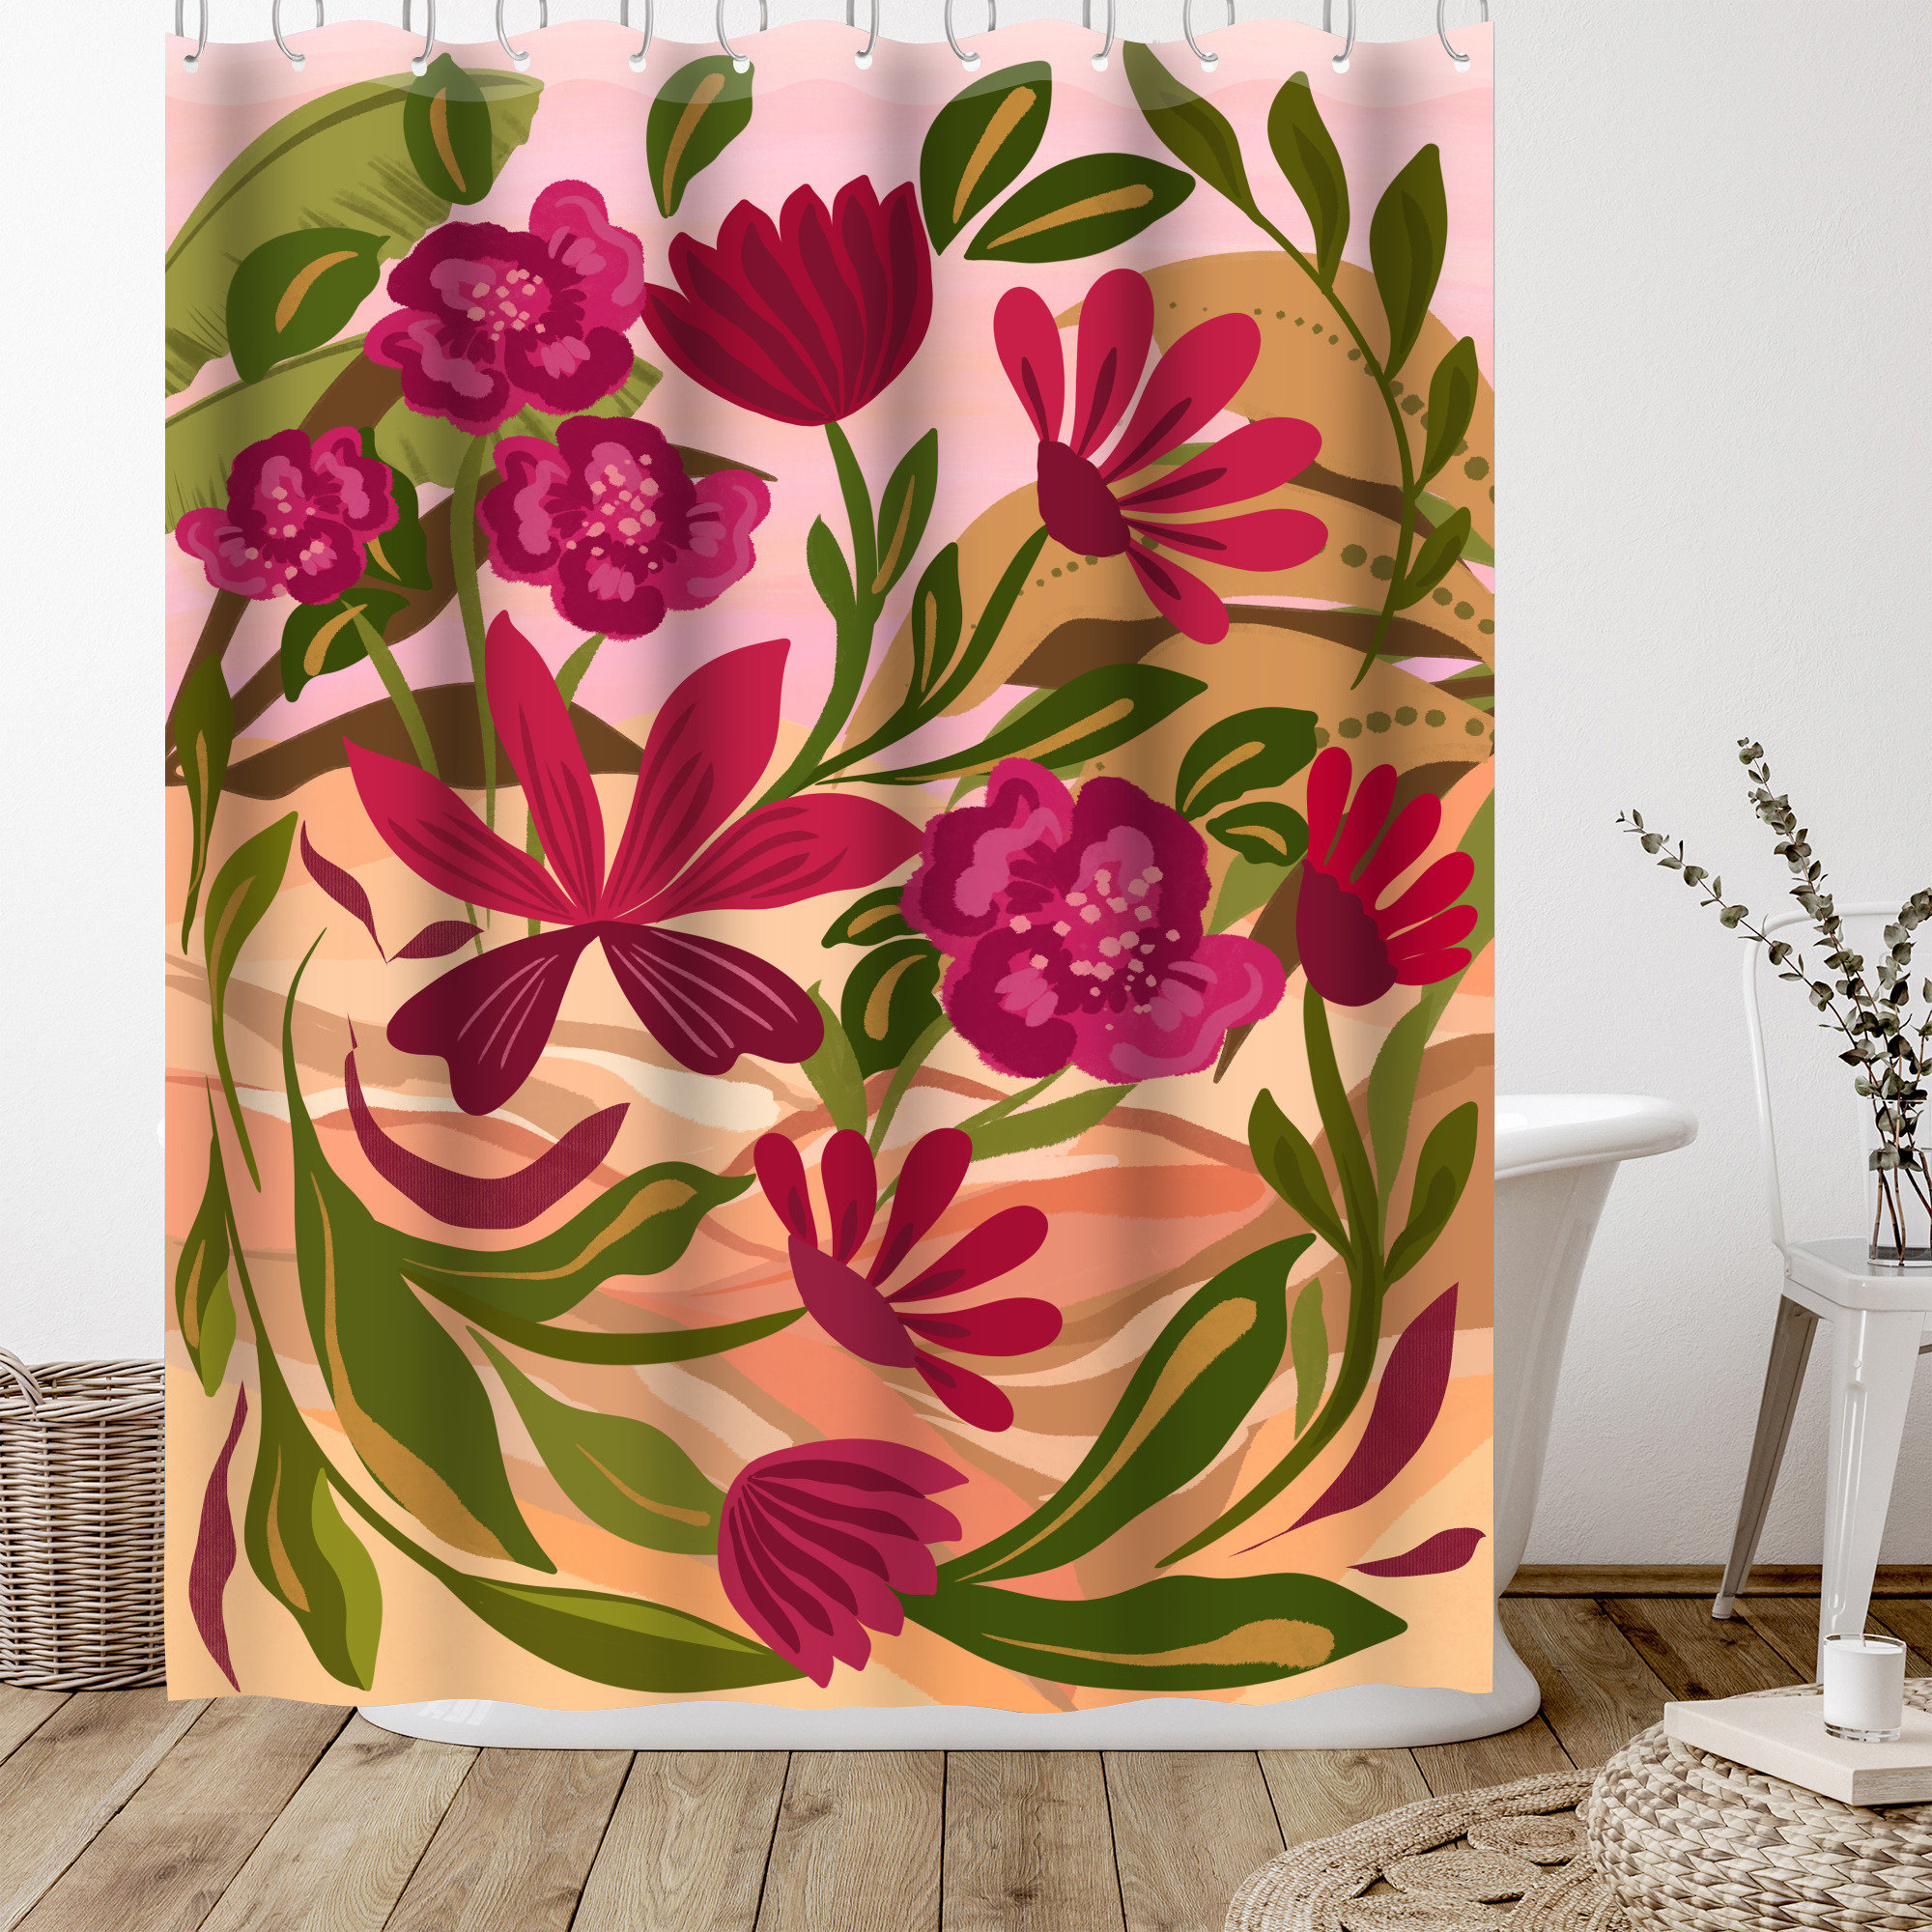 Self Love 101 by Lunette by Parul Shower Curtain 71 x 74